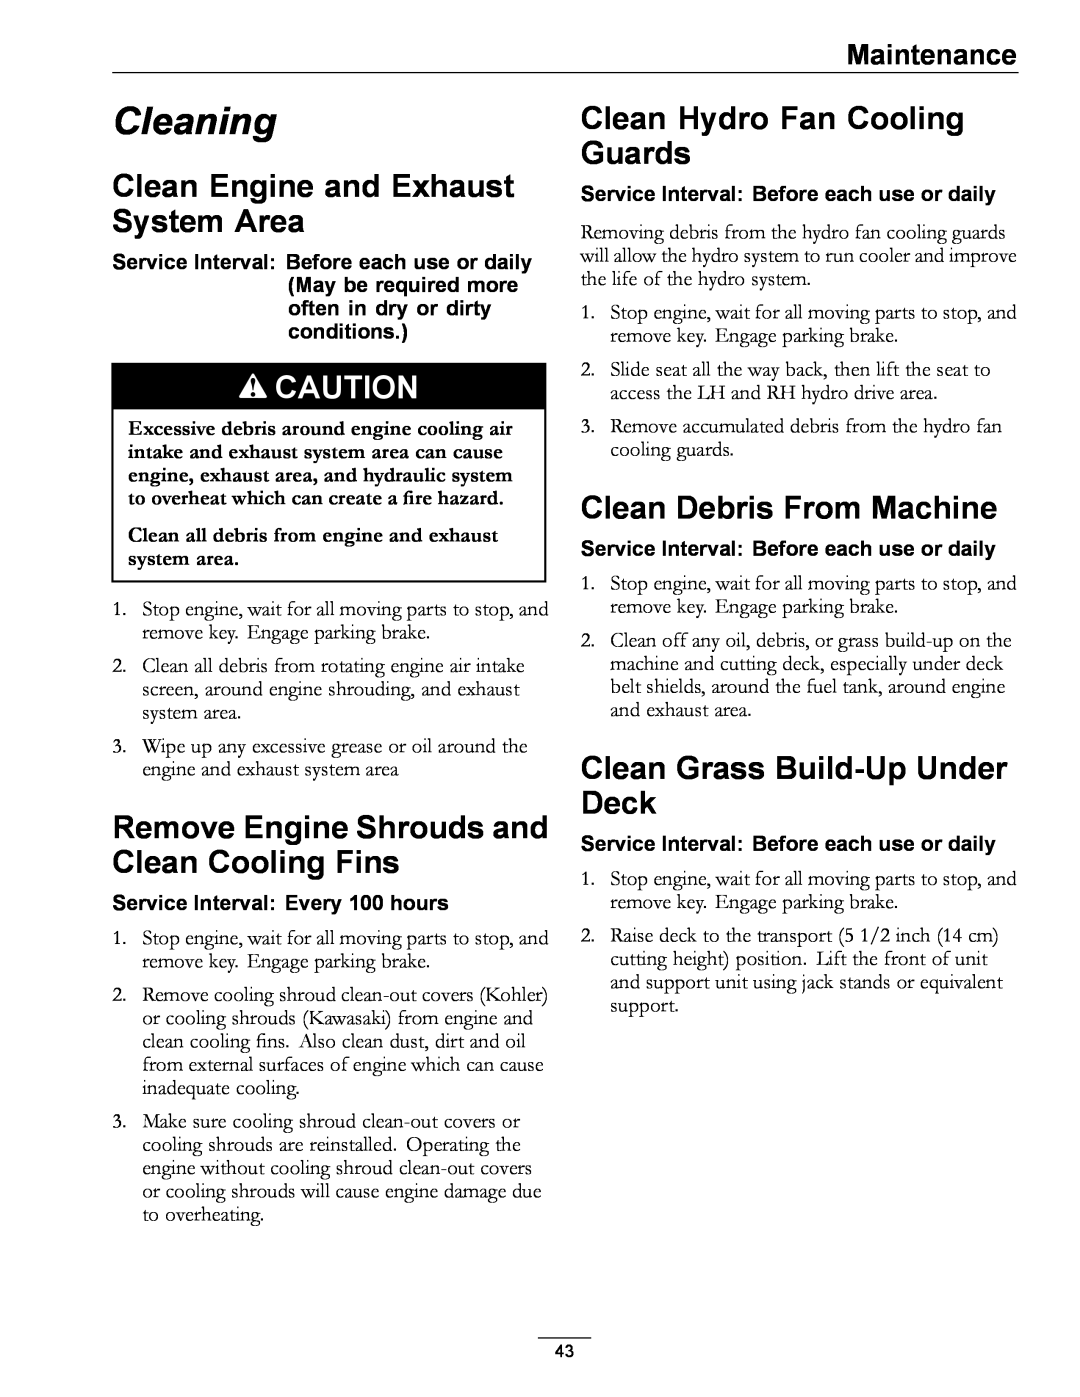 Exmark 4500-471 Cleaning, Clean Engine and Exhaust System Area, Remove Engine Shrouds and Clean Cooling Fins, Maintenance 